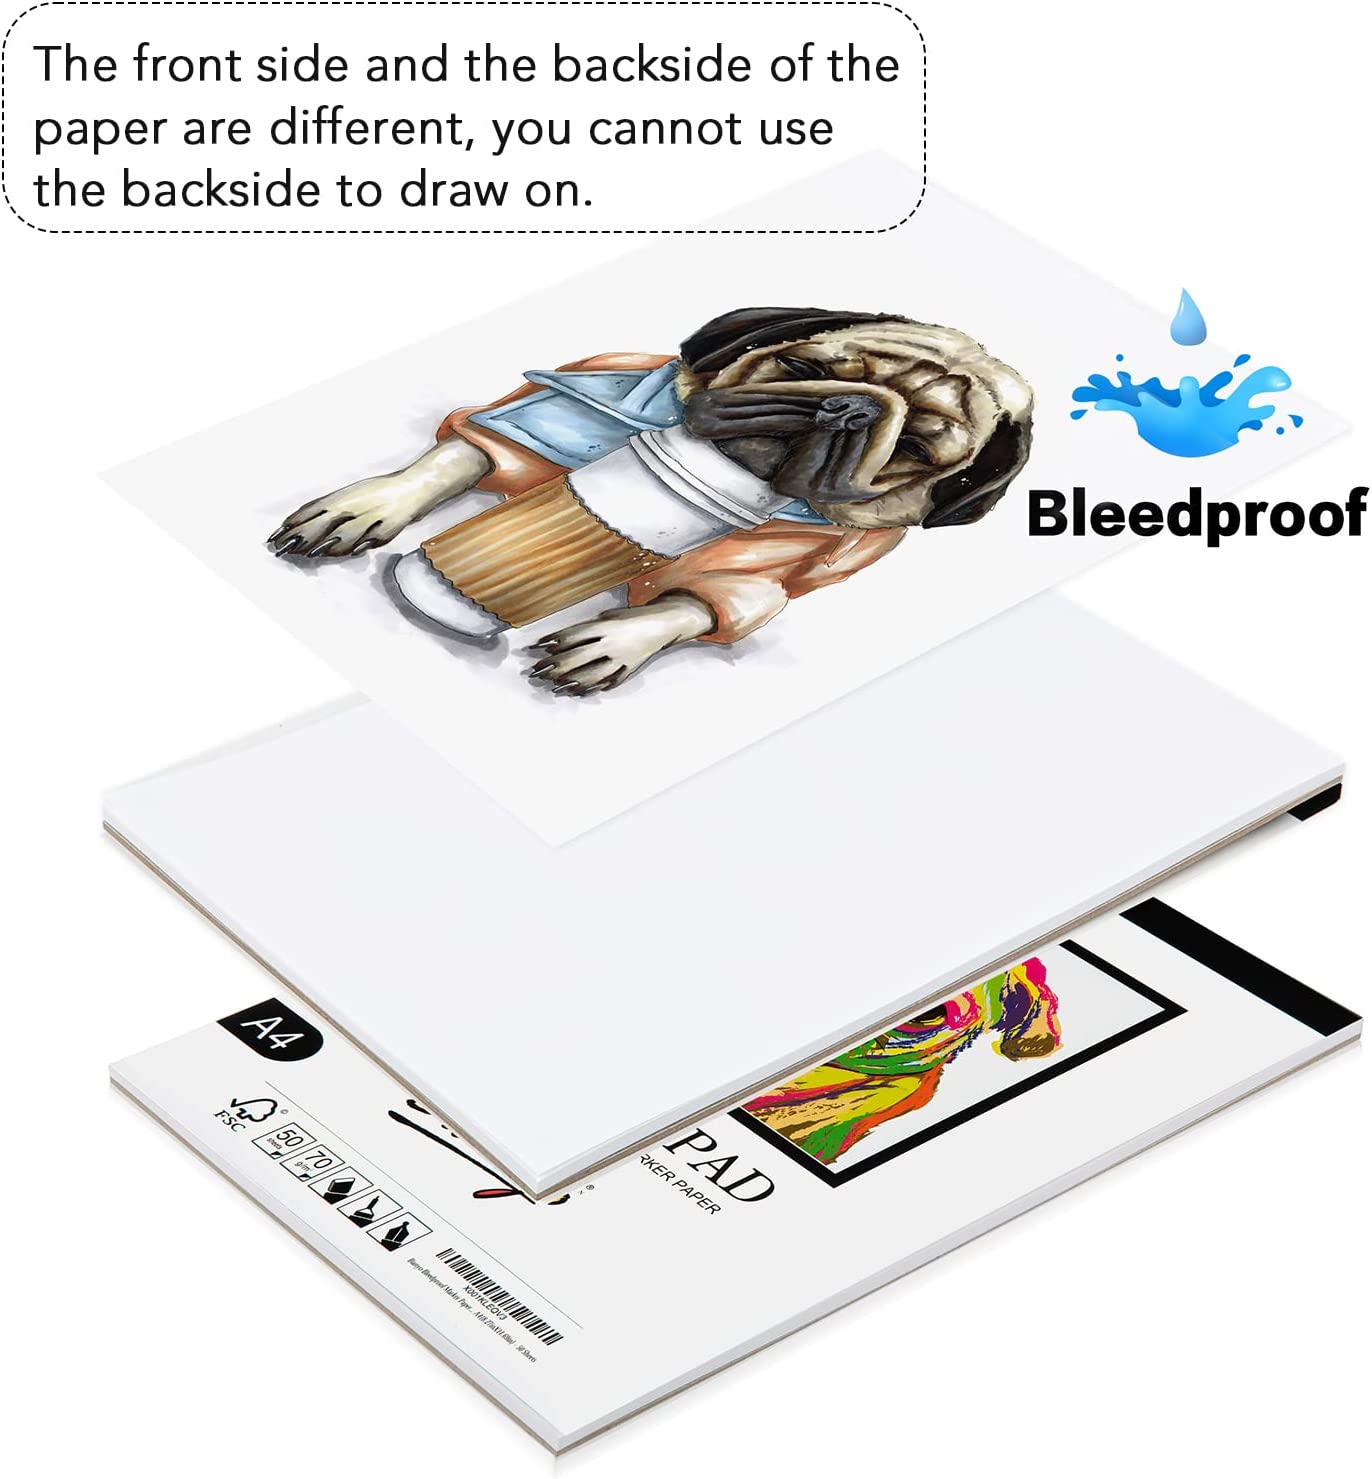 Bianyo Bleedproof Marker Paper Pad, Pack of 2 - image 4 of 6